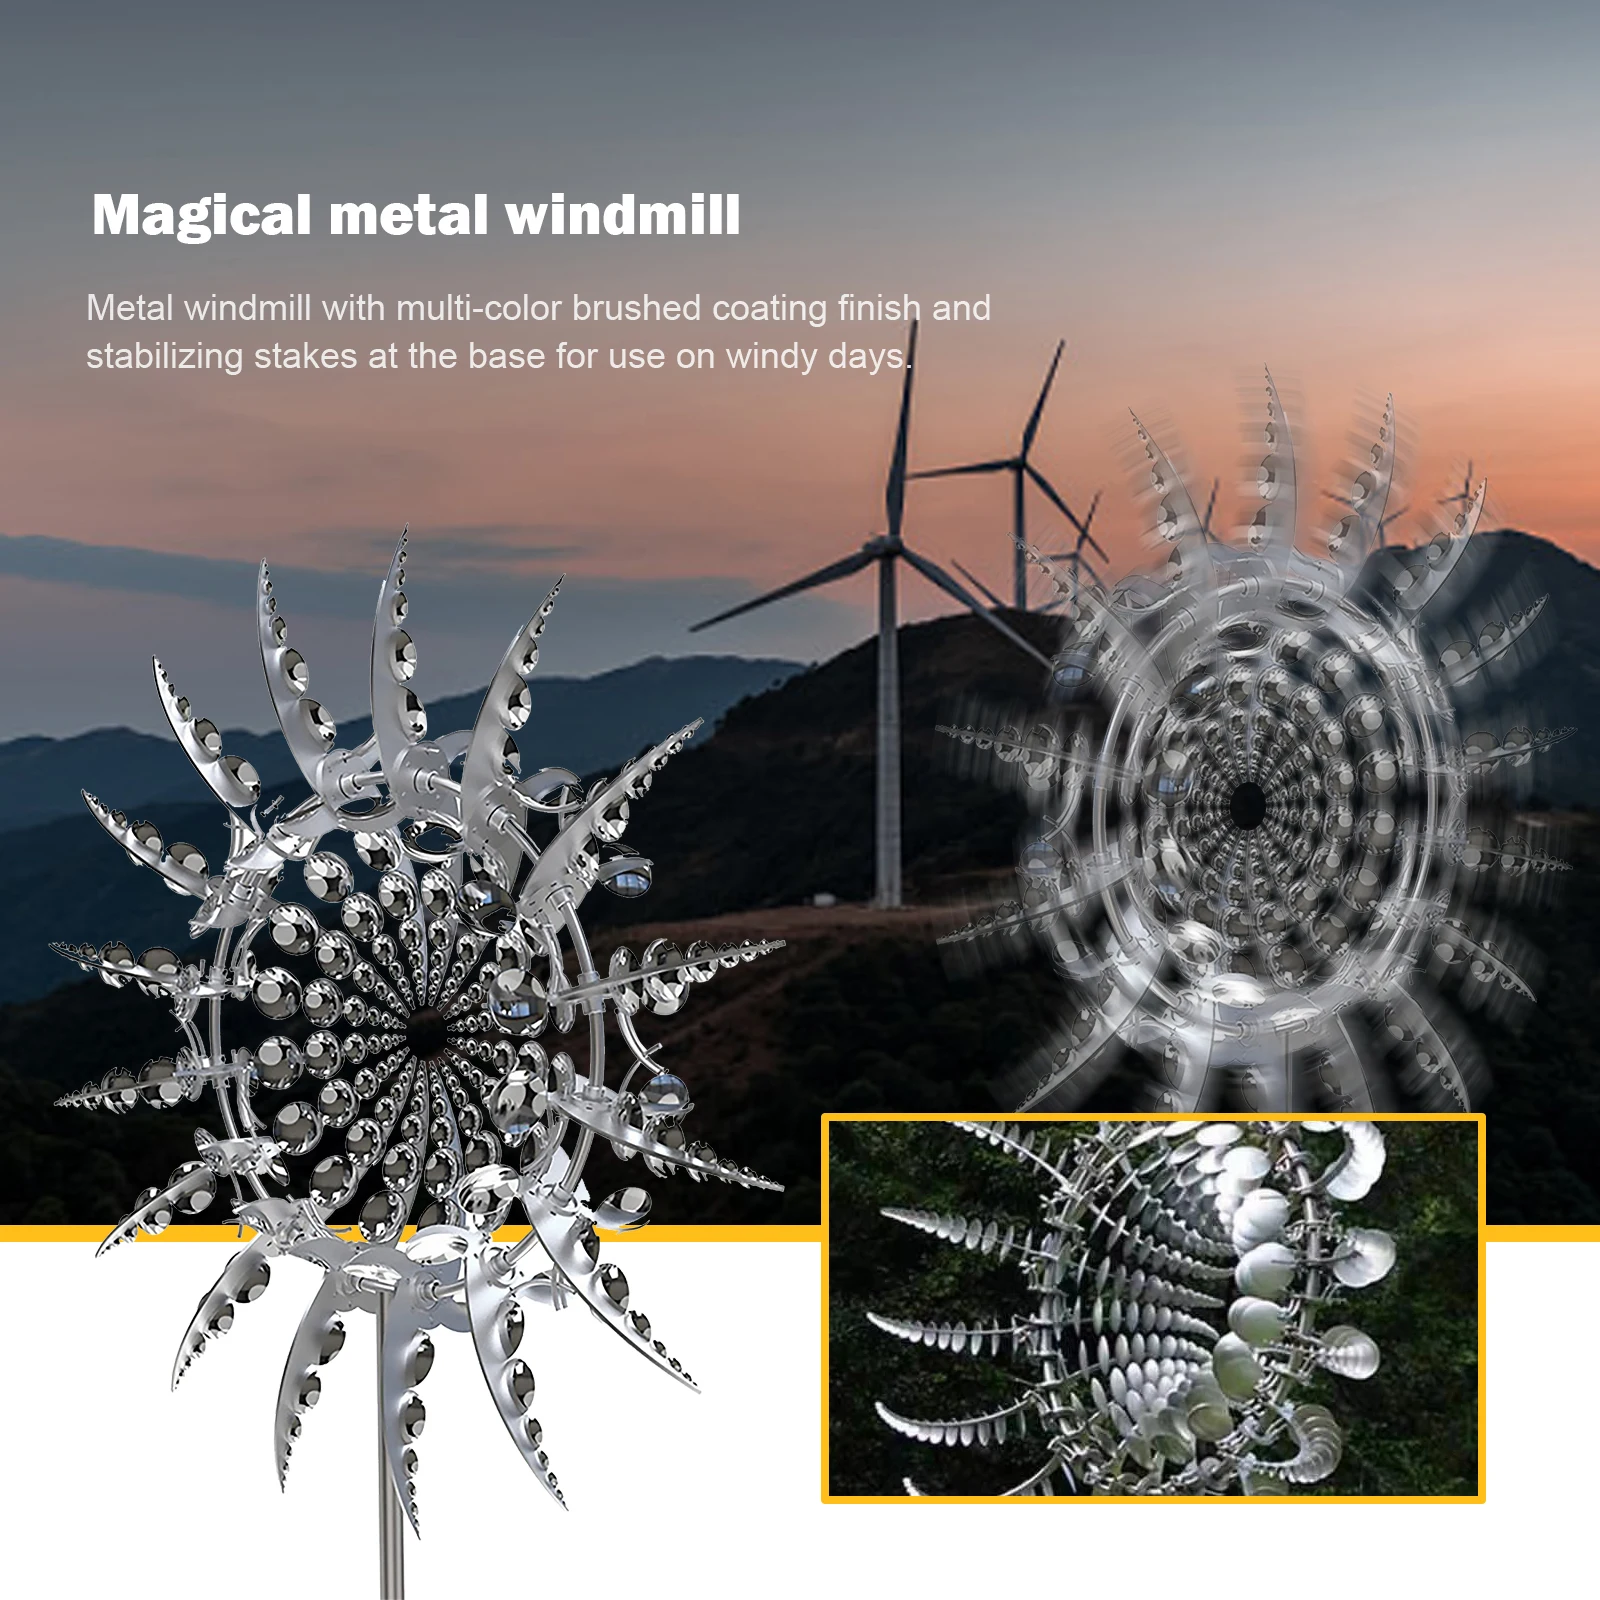 

Unique And Magical Metal Windmill Garden Decoration Outdoor Wind Spinners Wind Catchers Kinetic Metal Swivel for Yard Patio Lawn